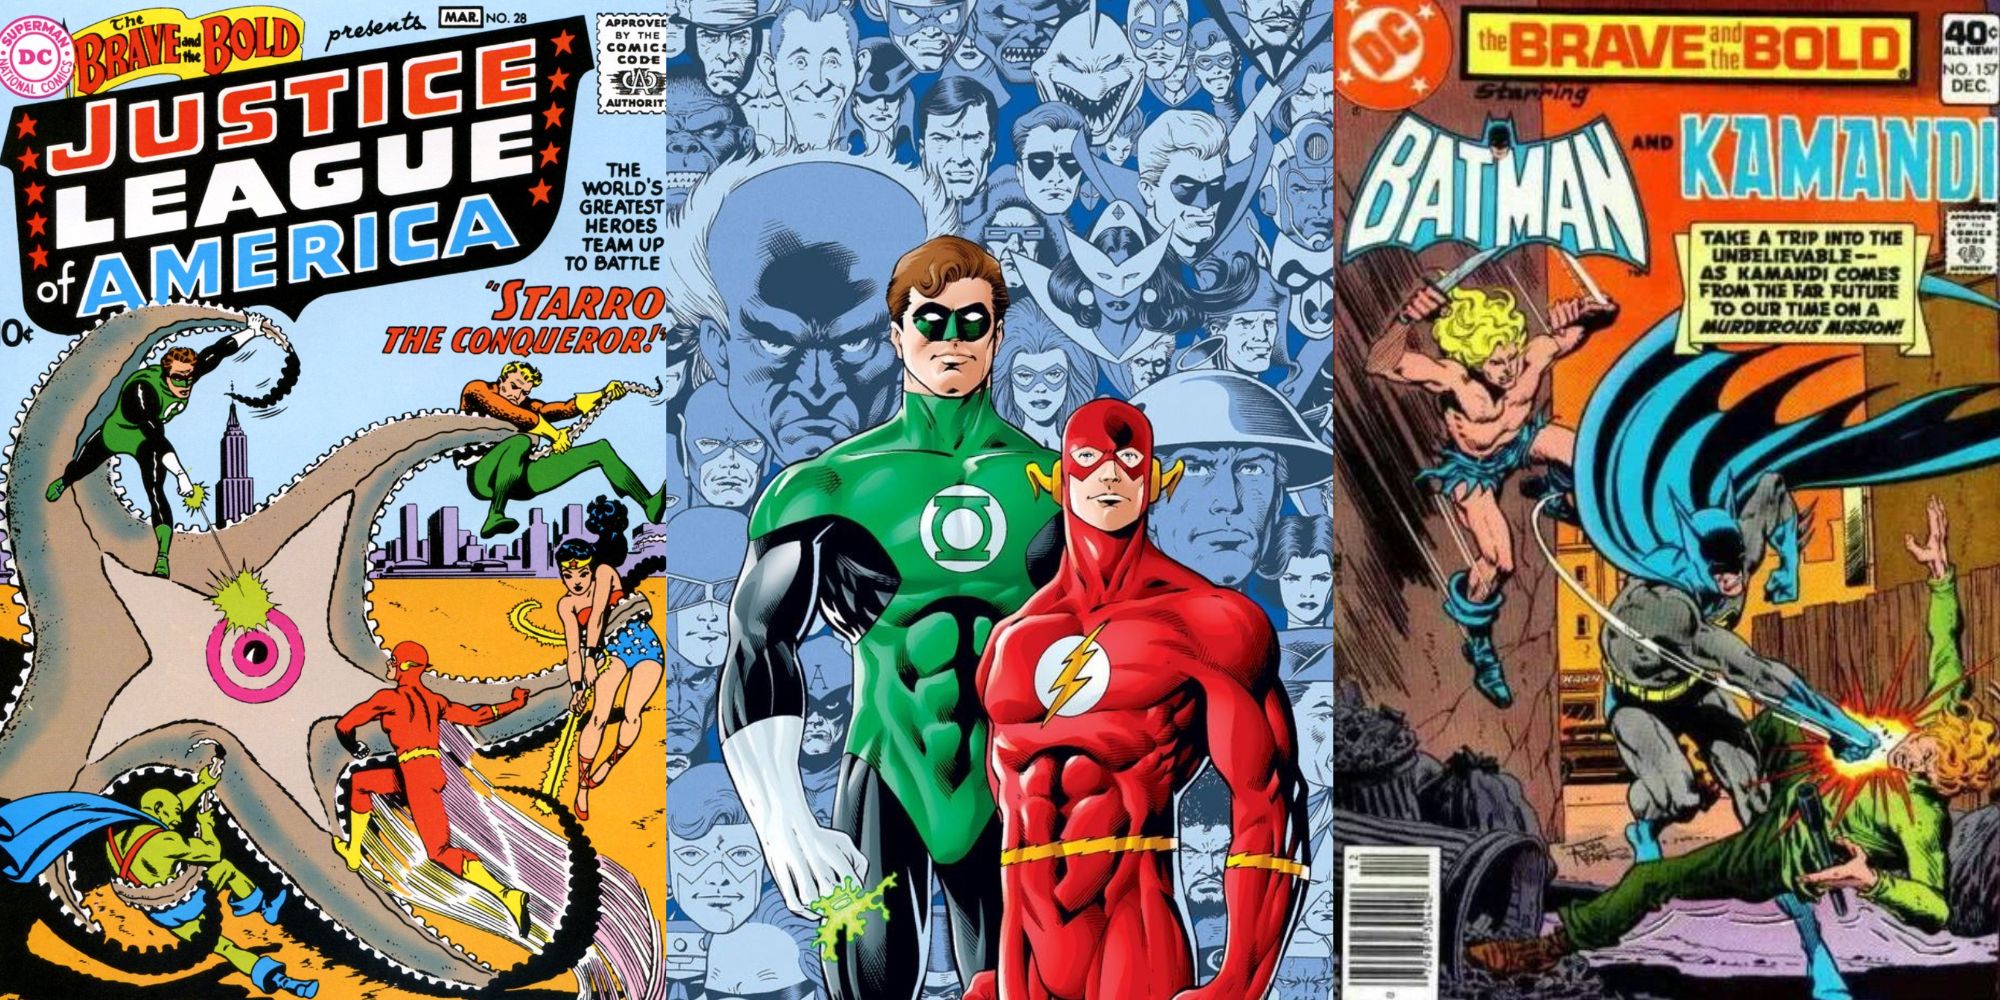 The Brave and the Bold Issue # 28 (DC Comics)